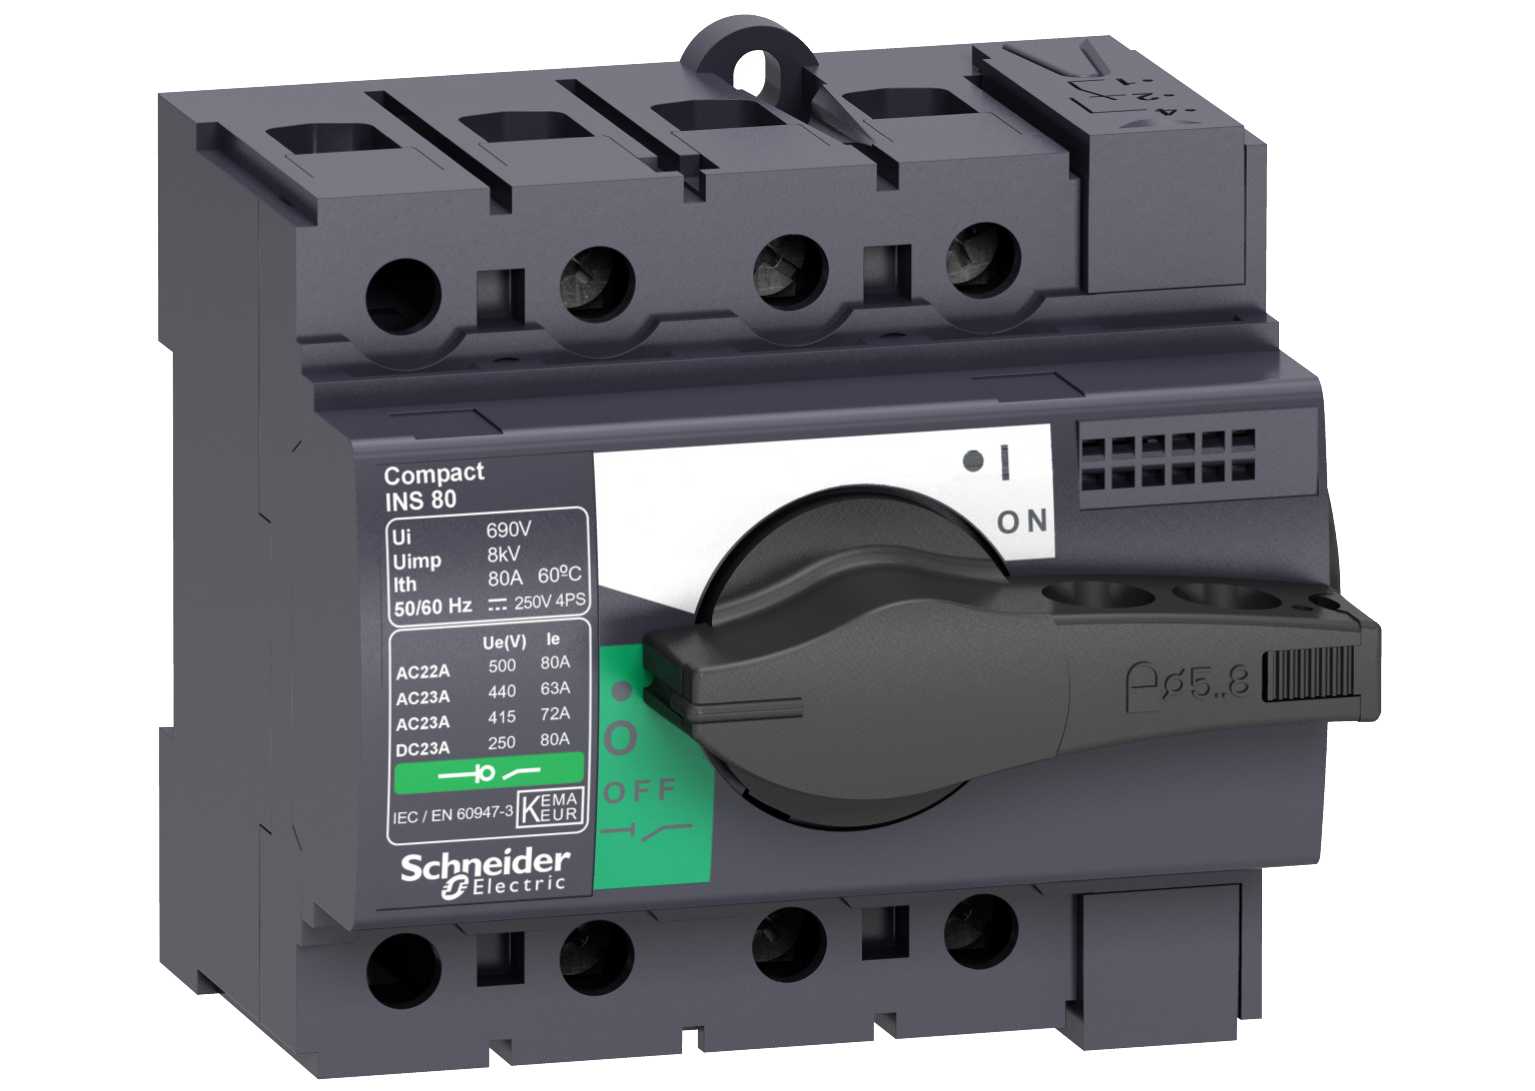 Schneider Electric - LASTBRYTER INS63 3P.  28902  INTERPACT 63A